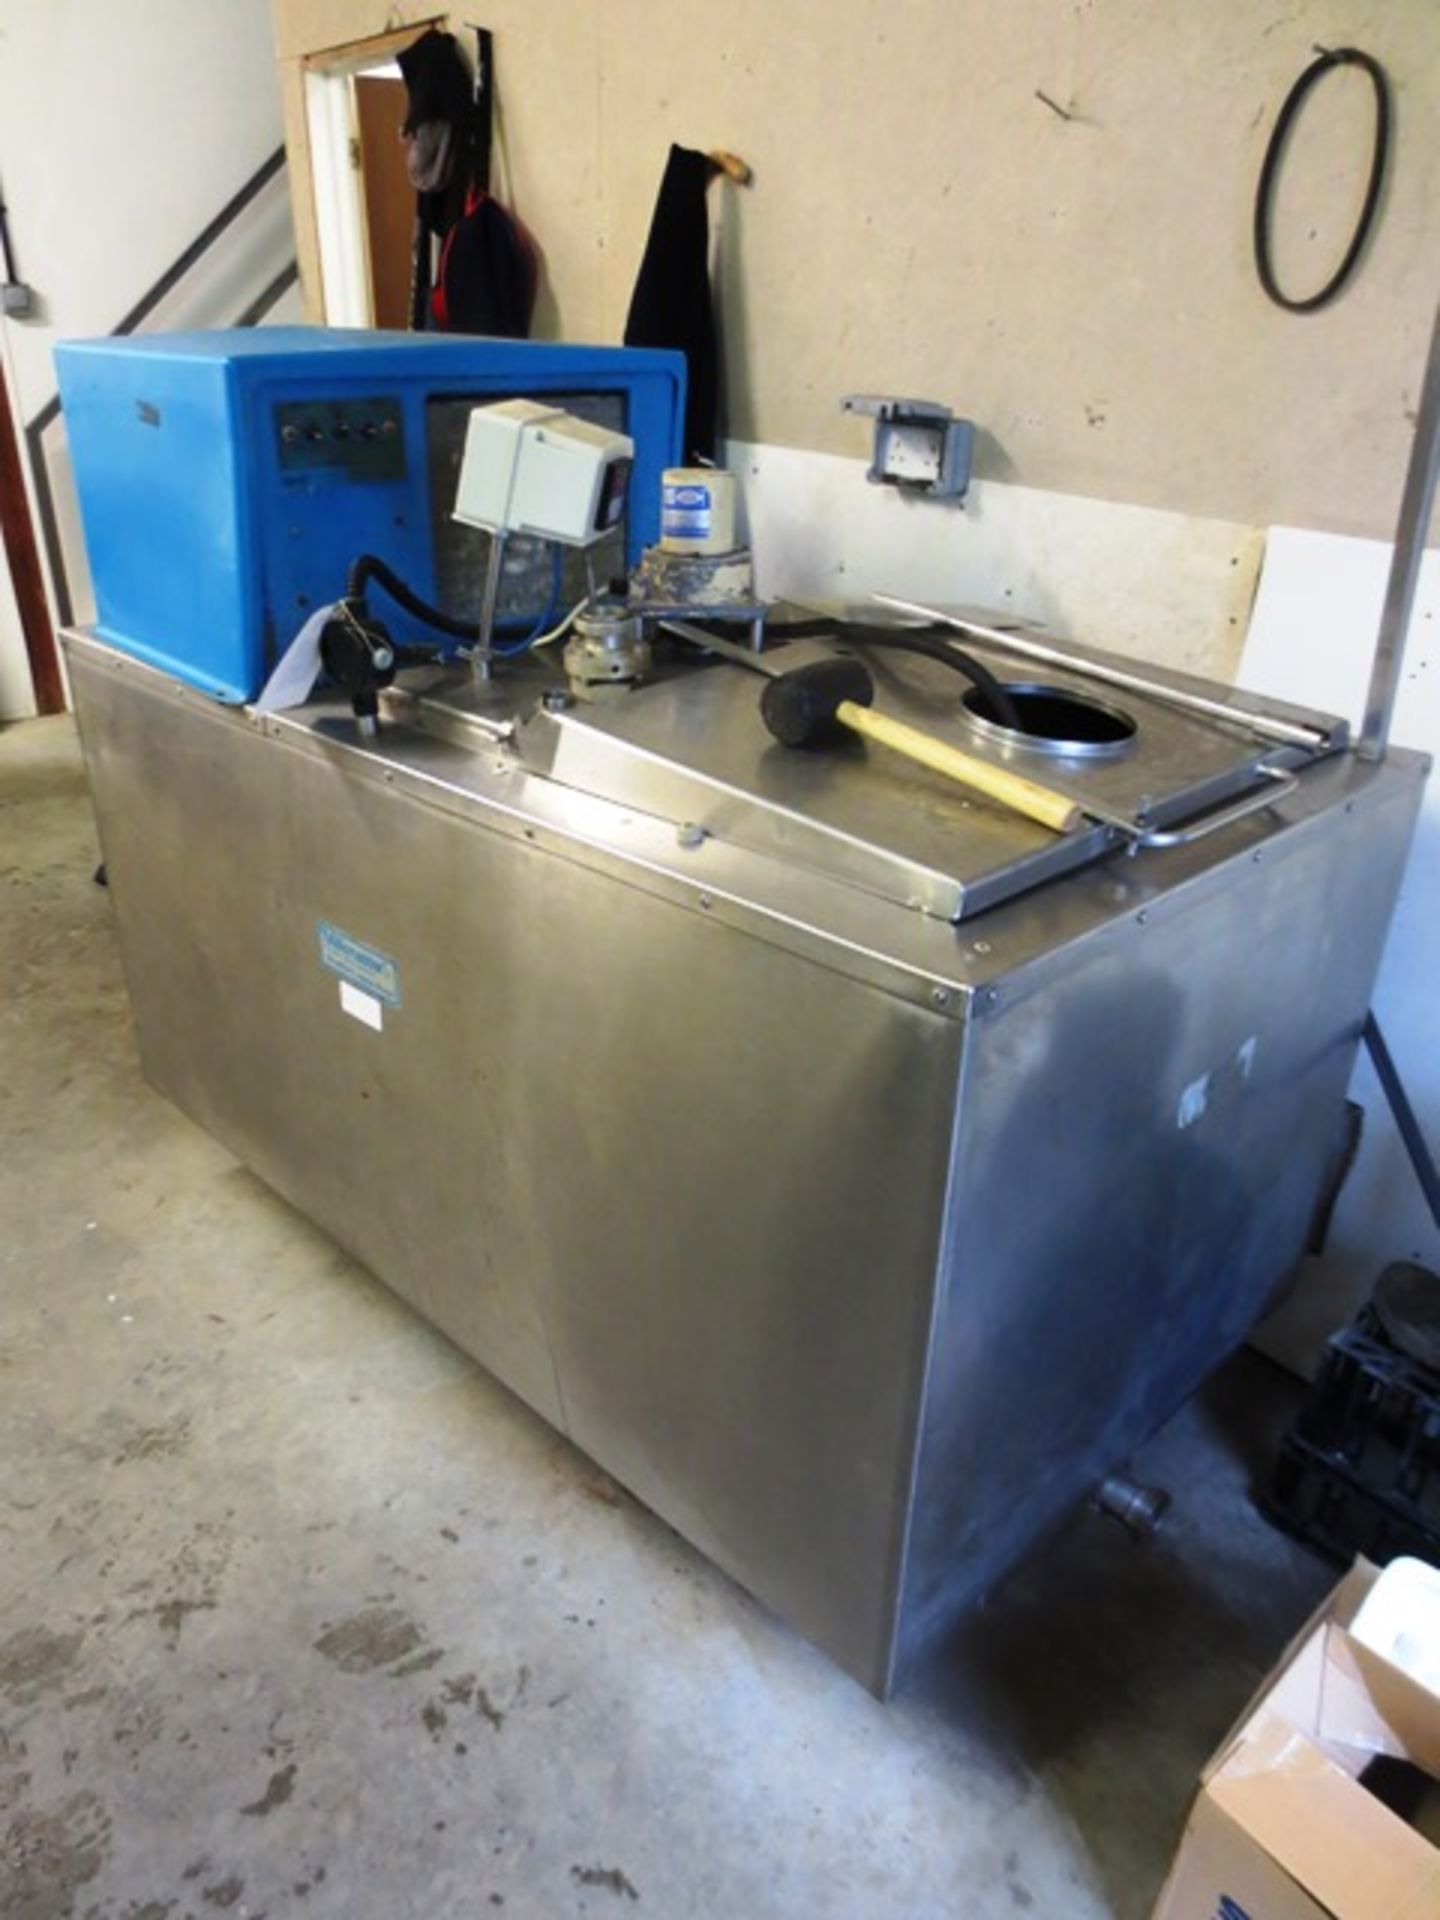 Milkmaster jacketed stainless steel rectangular milk storage tank with agitator, and MK8 compressor, - Image 3 of 5